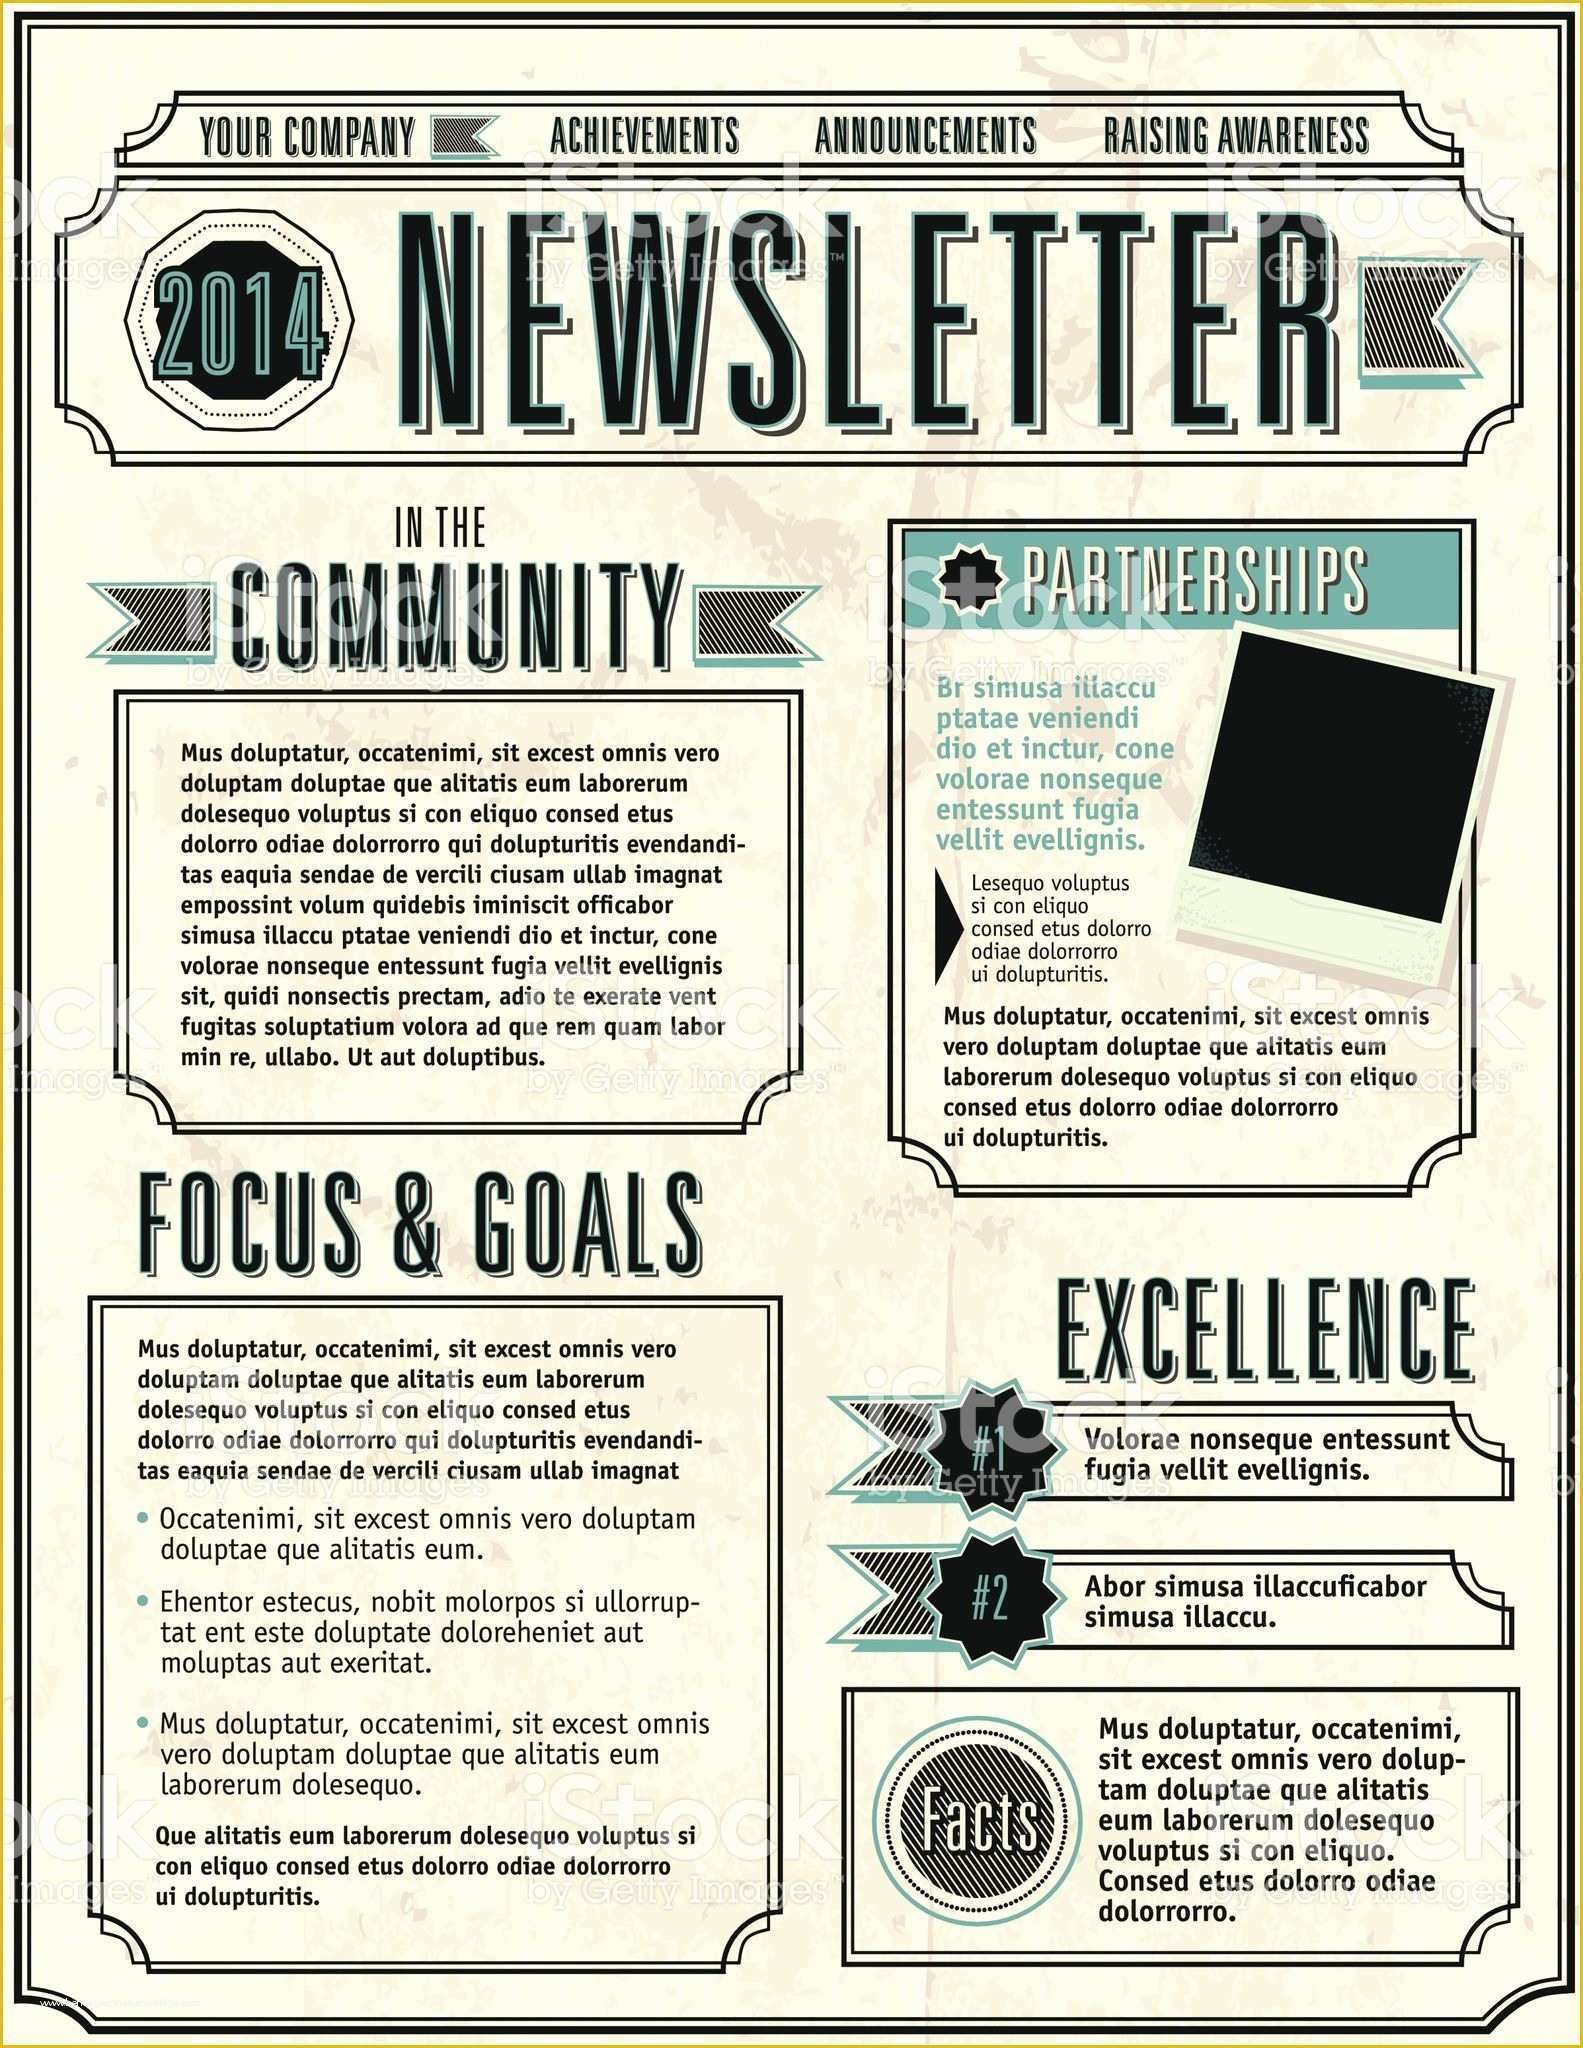 Company Newsletter Template Free Of Vector Illustration Of A Pany Newsletter Design